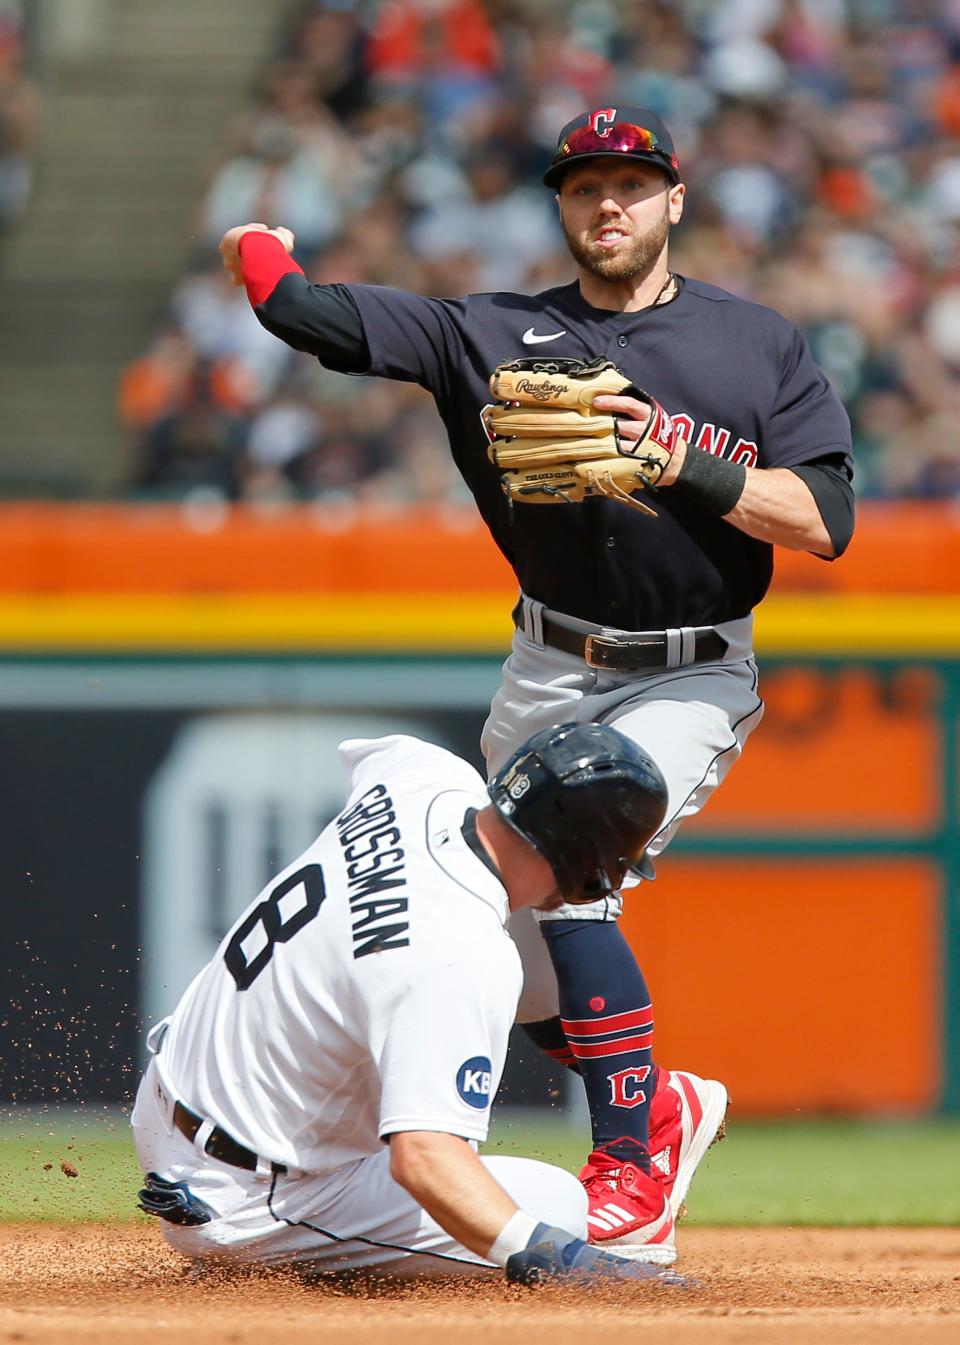 Guardians second baseman Owen Miller turns the ball after getting a force out on Tigers right fielder Robbie Grossman during the first inning on Saturday, May 28, 2022, at Comerica Park.